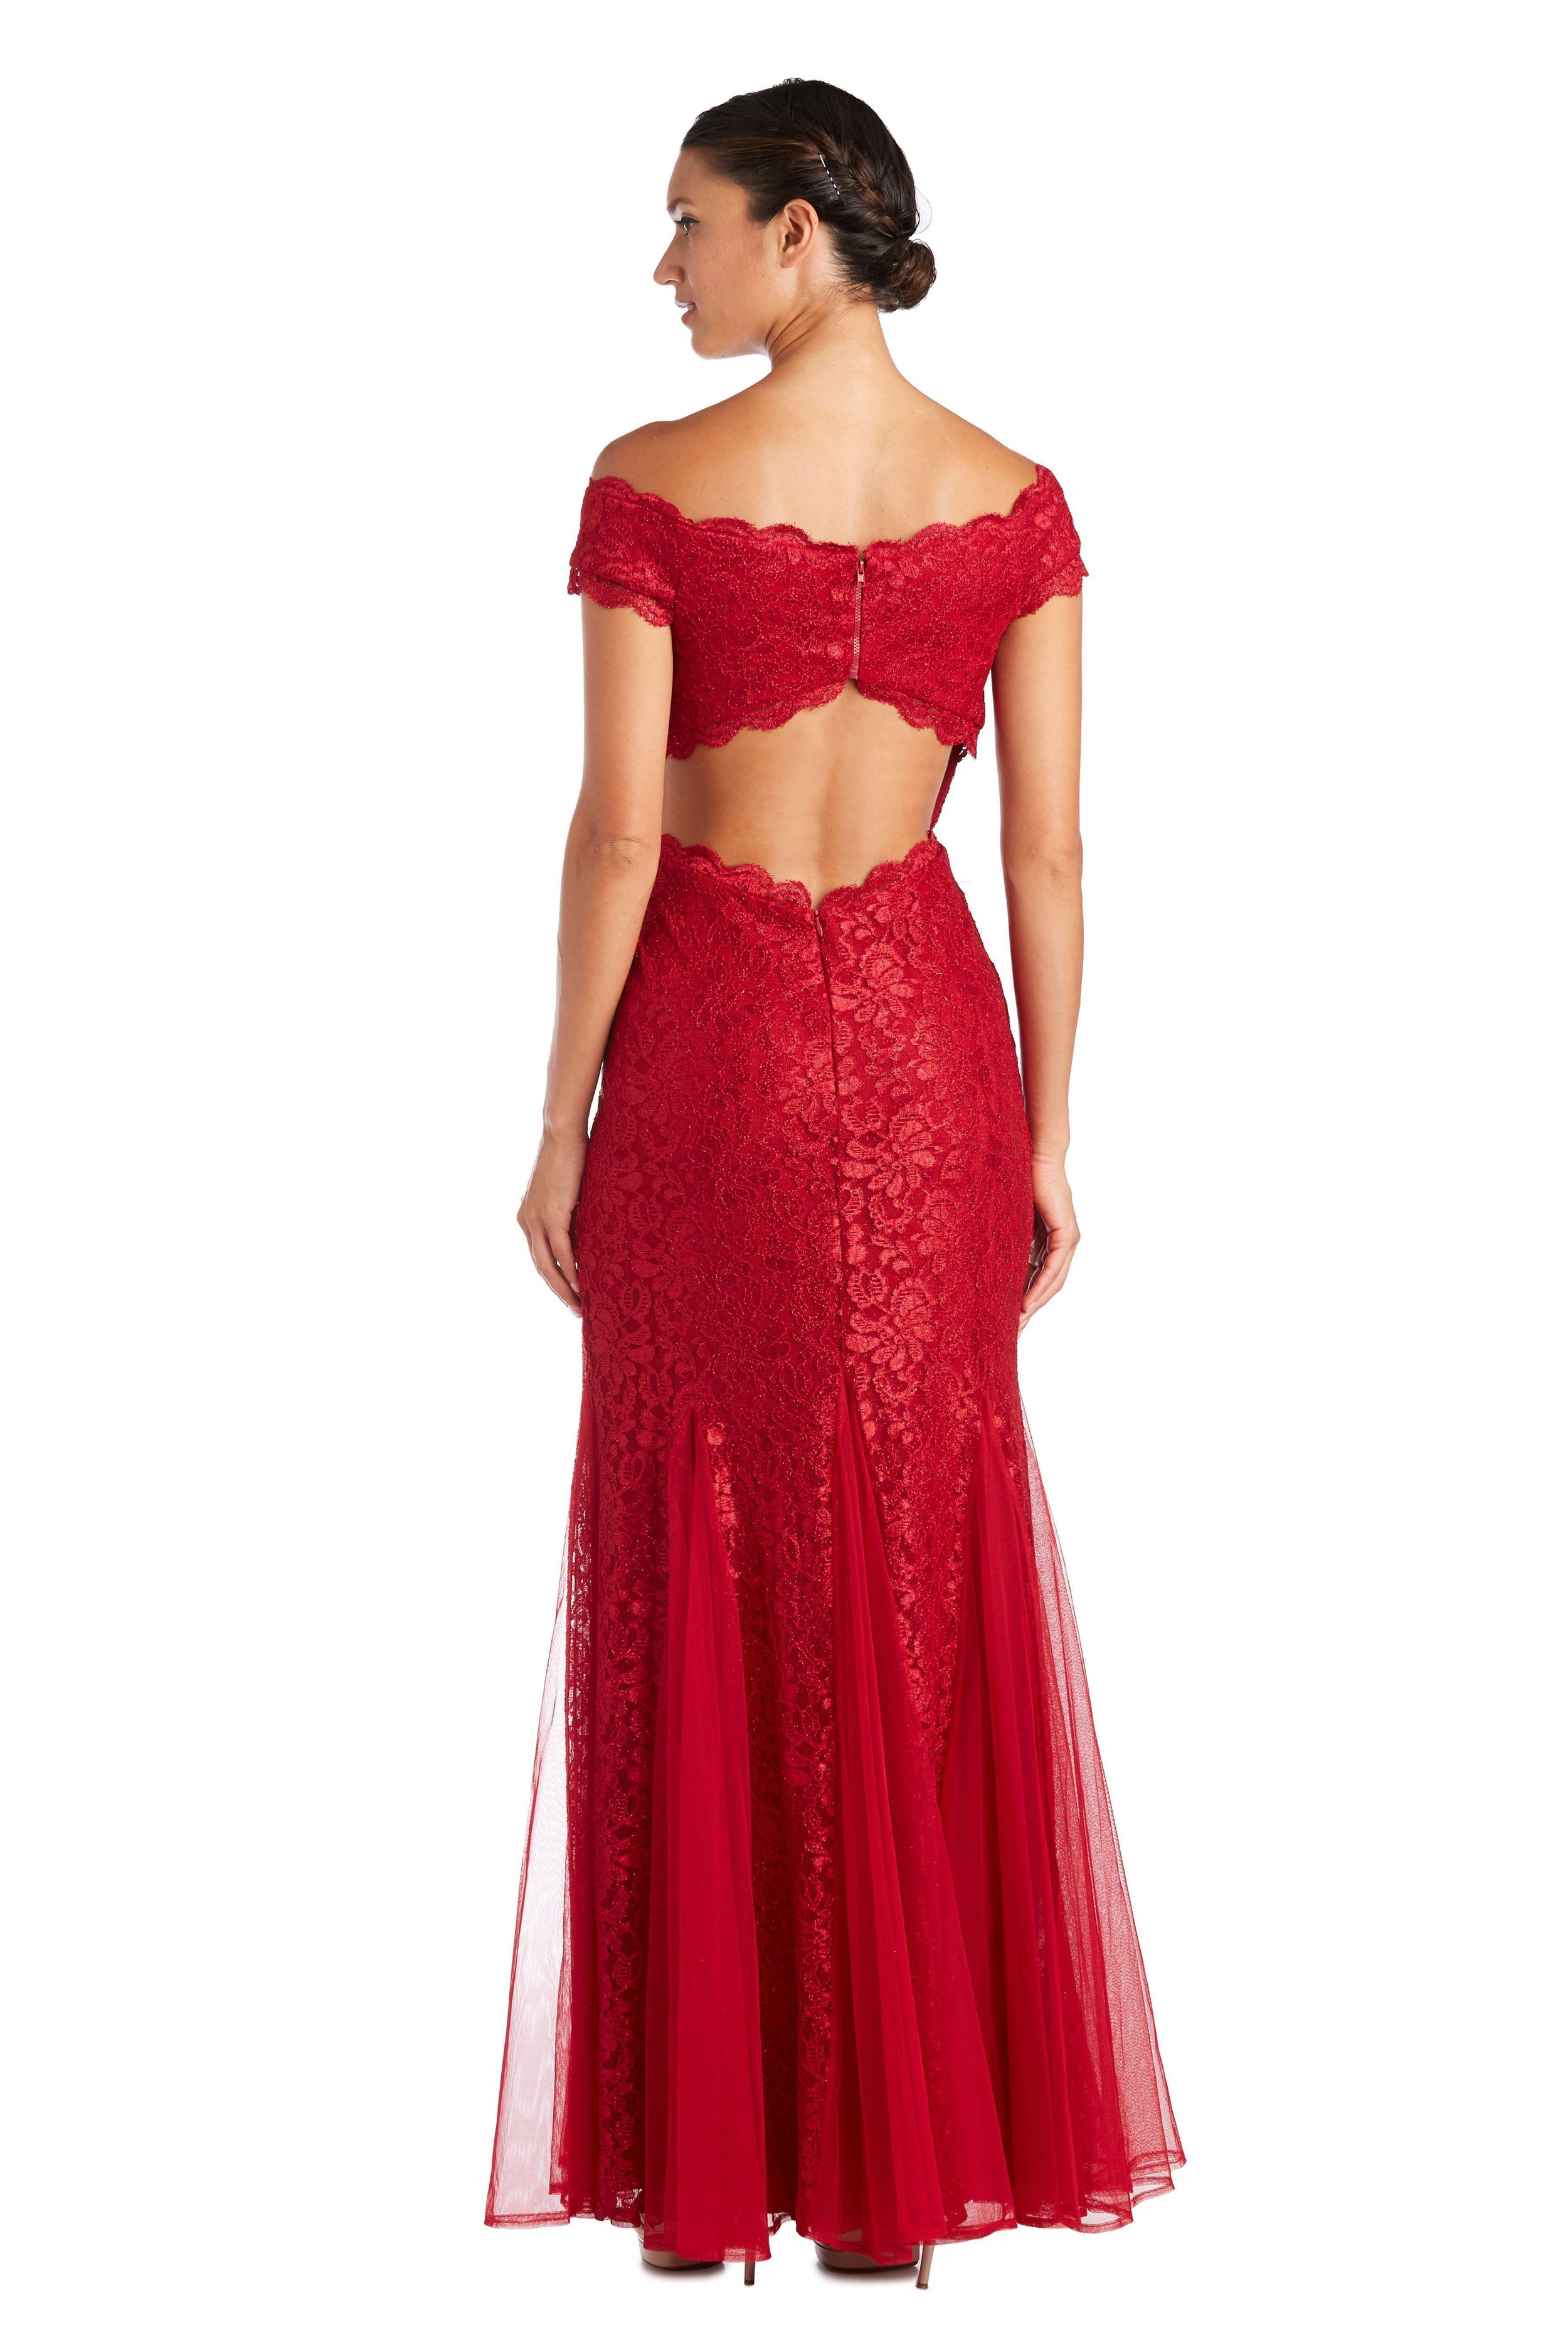 Nightway Long Formal Dress 21930 - The Dress Outlet